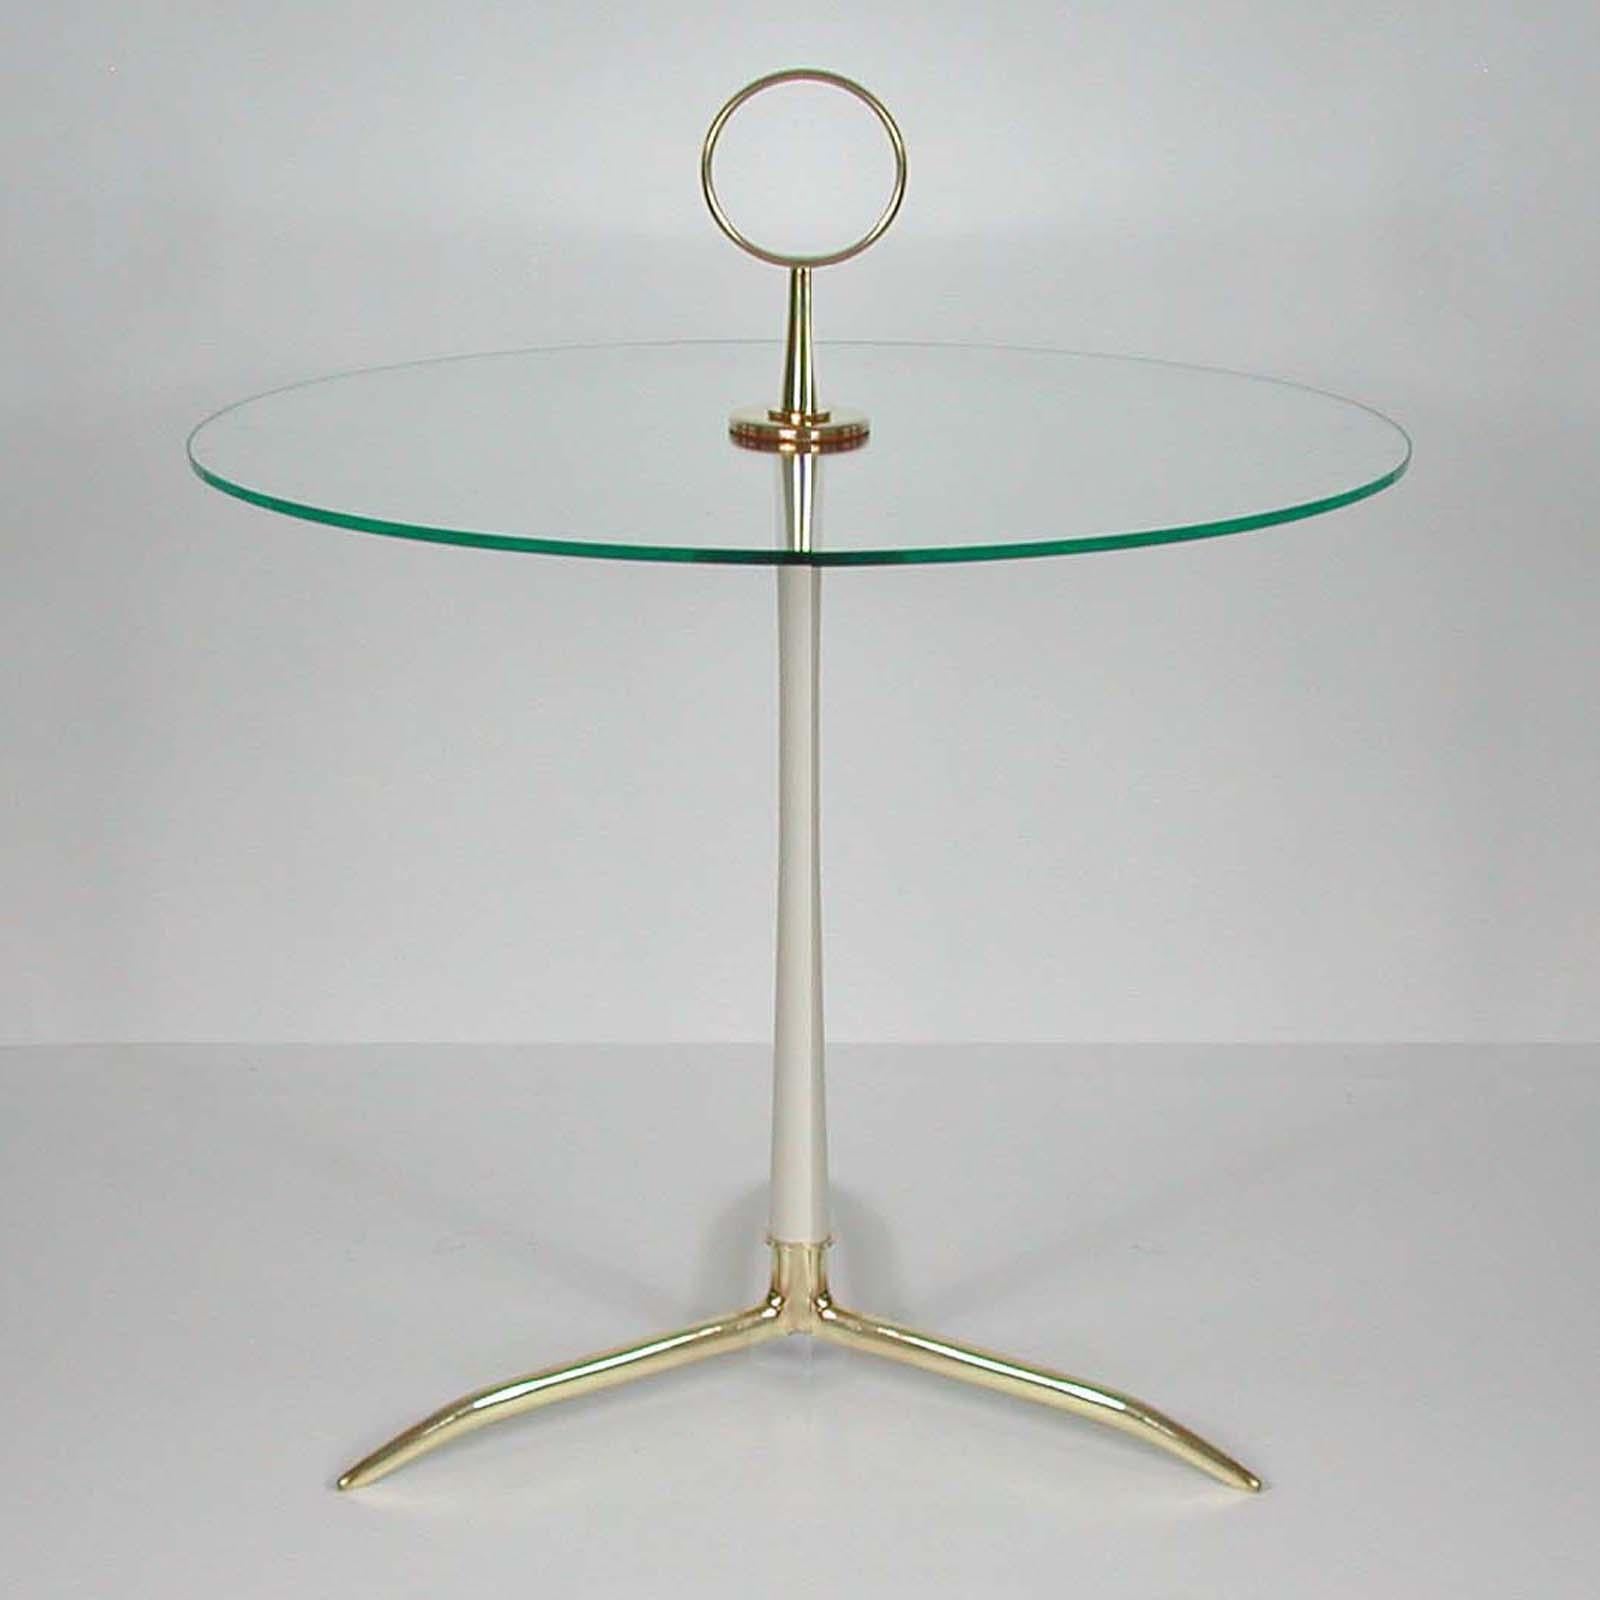 This elegant midcentury side table was designed by Cesare Lacca and manufactured in Italy in the 1950s. 

It is made of brass, light cream lacquered metal and clear glass with a polished edge on a tripod base. The round handle makes it easy to